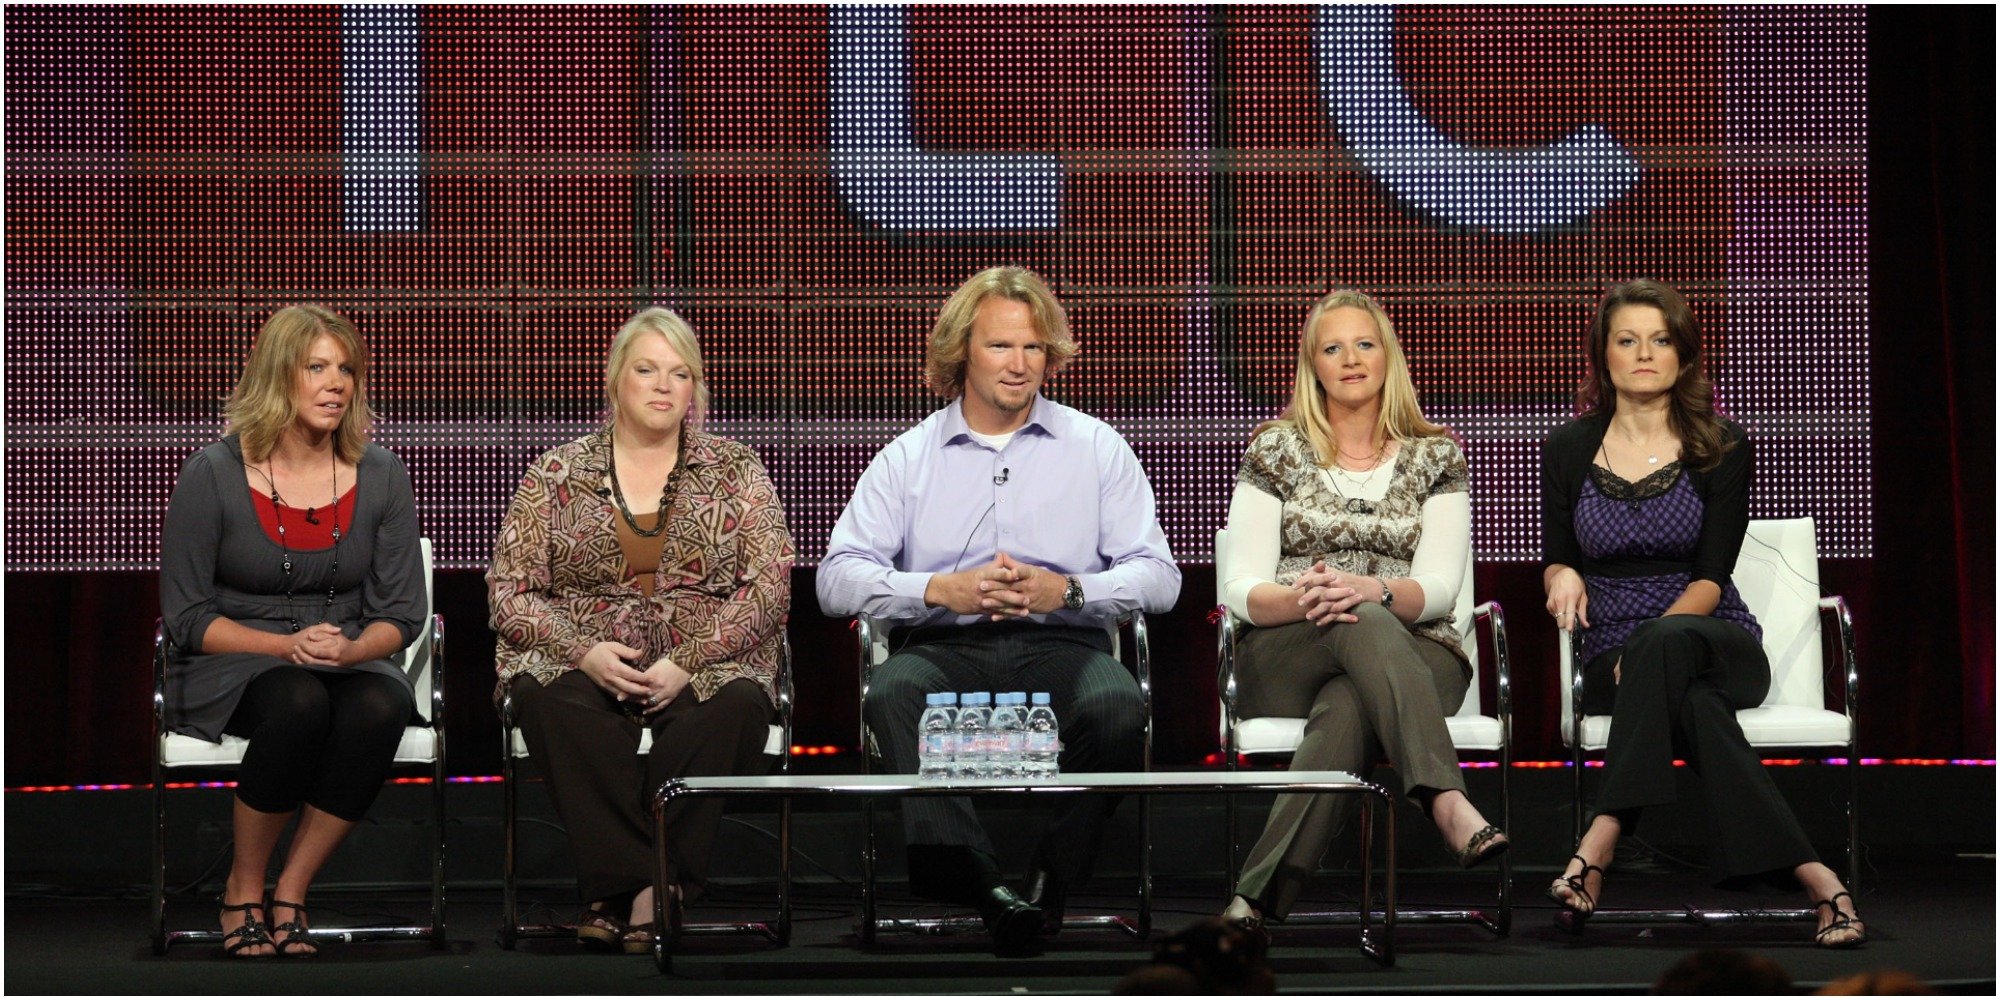 Meri Brown, Janelle Brown, Kody Brown, Christine Brown, and Robyn Brown appear on stage during the 2010 Summer TCA press tour for 'Sister Wives'